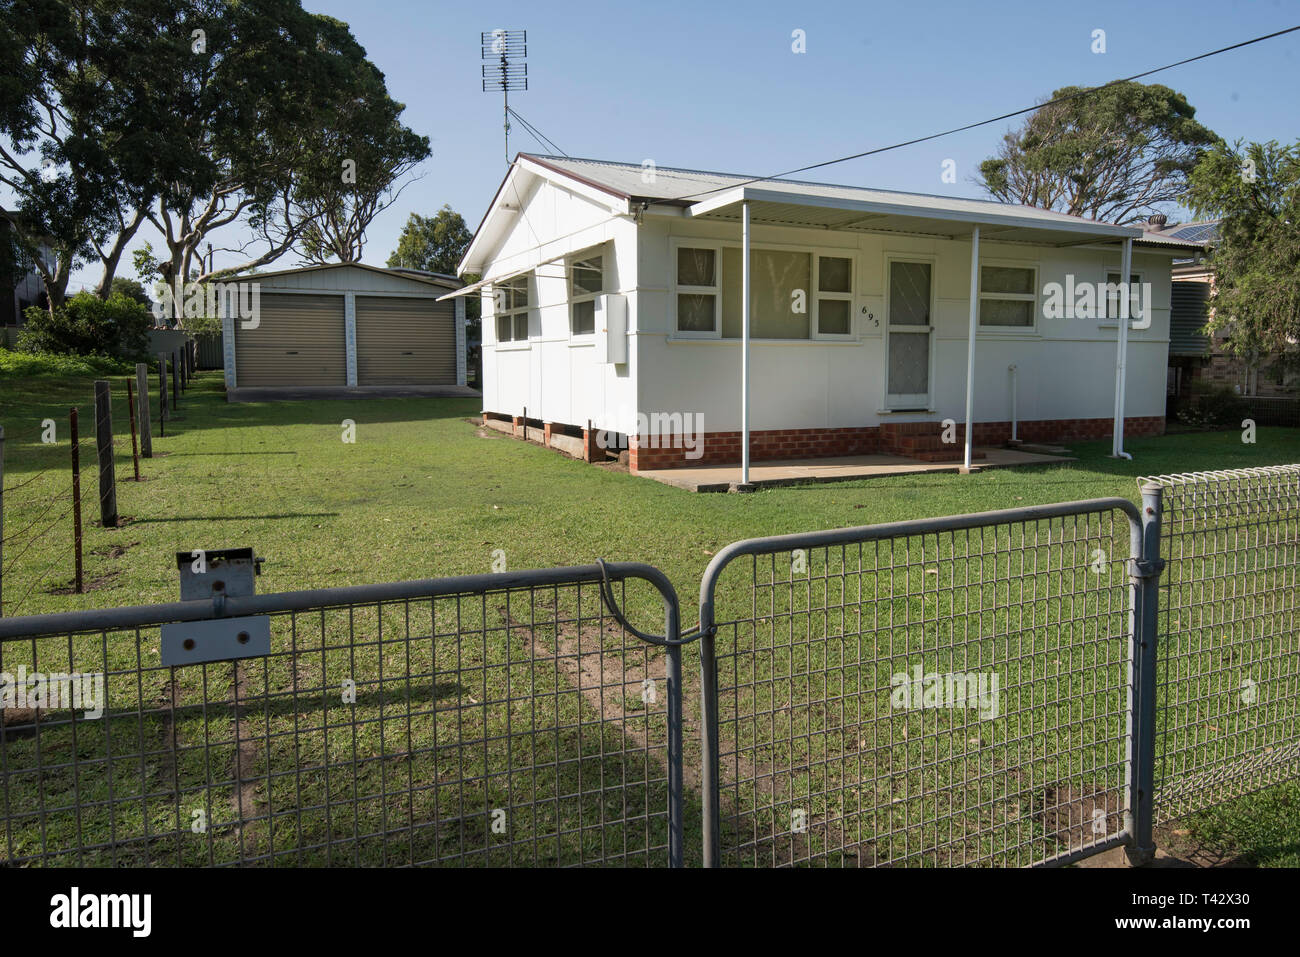 A small 1950's fibro (Asbestos fibrous cement) home with a double garage and galvanized iron front fence in the NSW south coast village of Kioloa Stock Photo